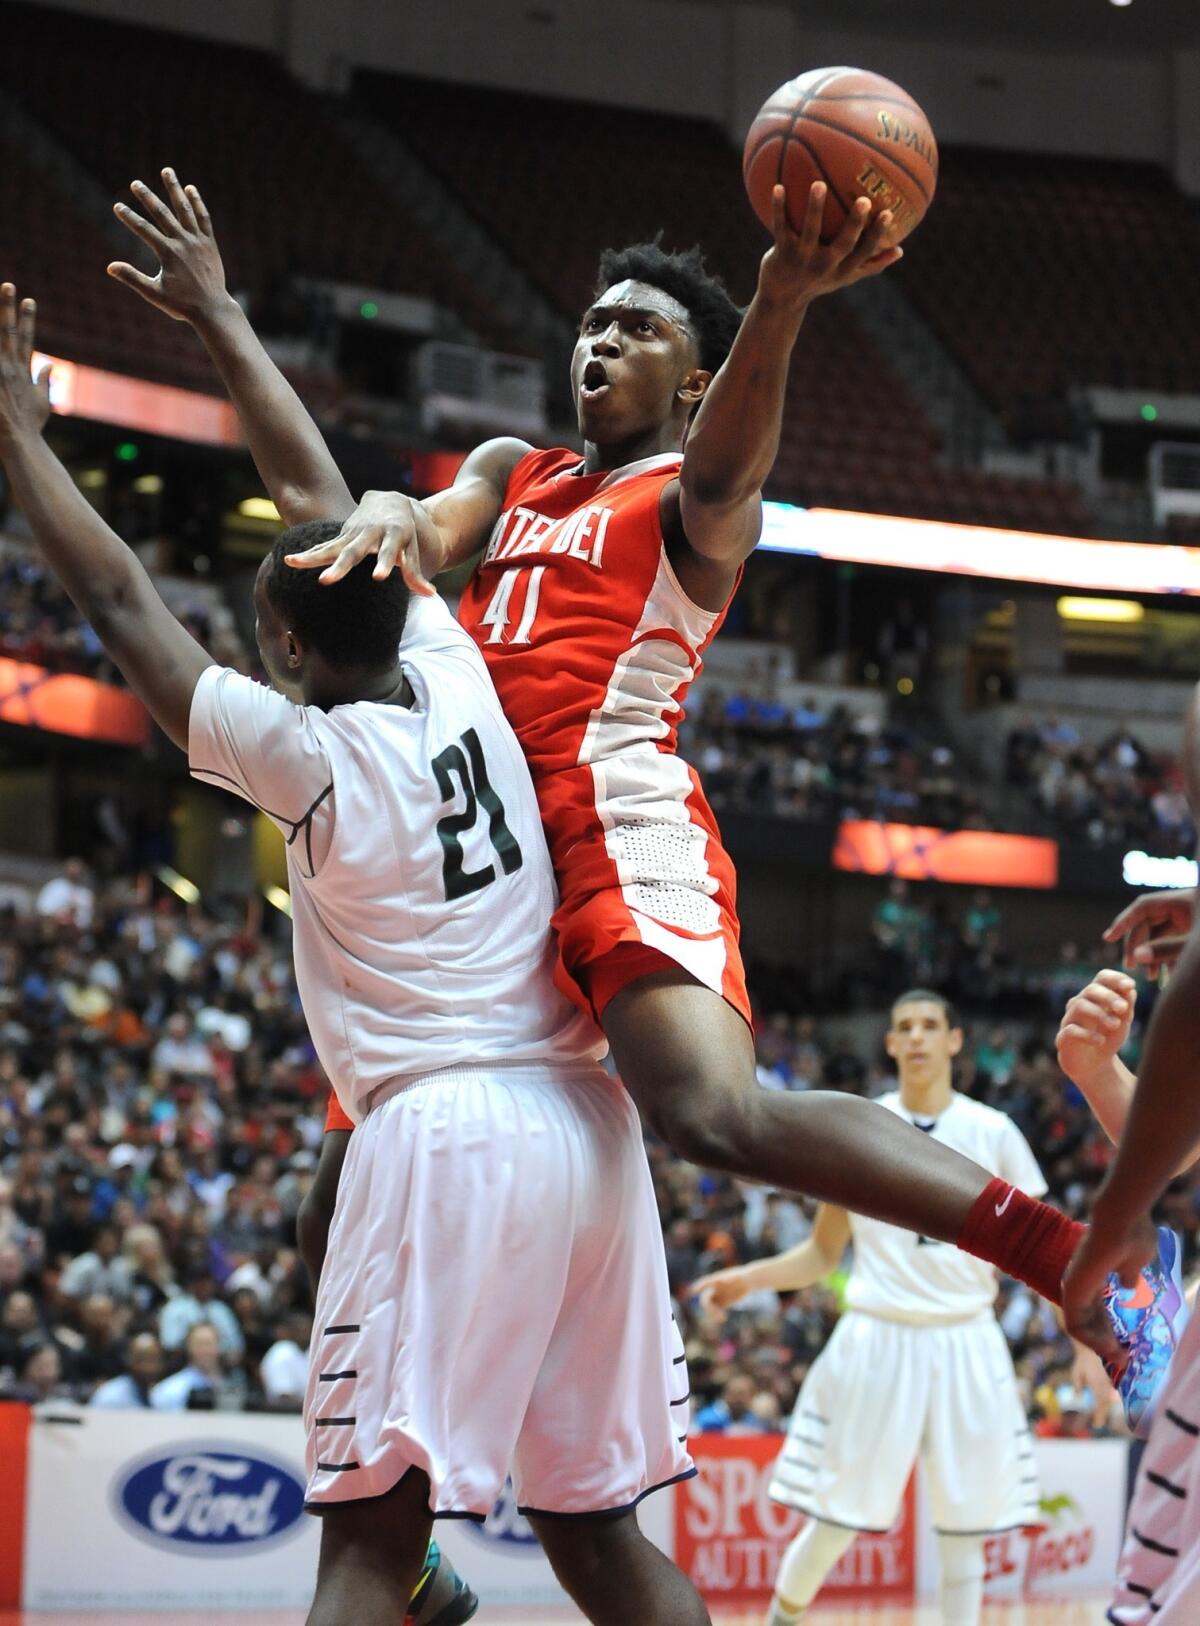 Mater Dei's Stanley Johnson, shown shooting over Chino Hills' Nnamdi Okongwu, scored the Monarchs' final eight points en route to a 48-44 victory Saturday in the Southern Section Open Division boys' basketball championship.